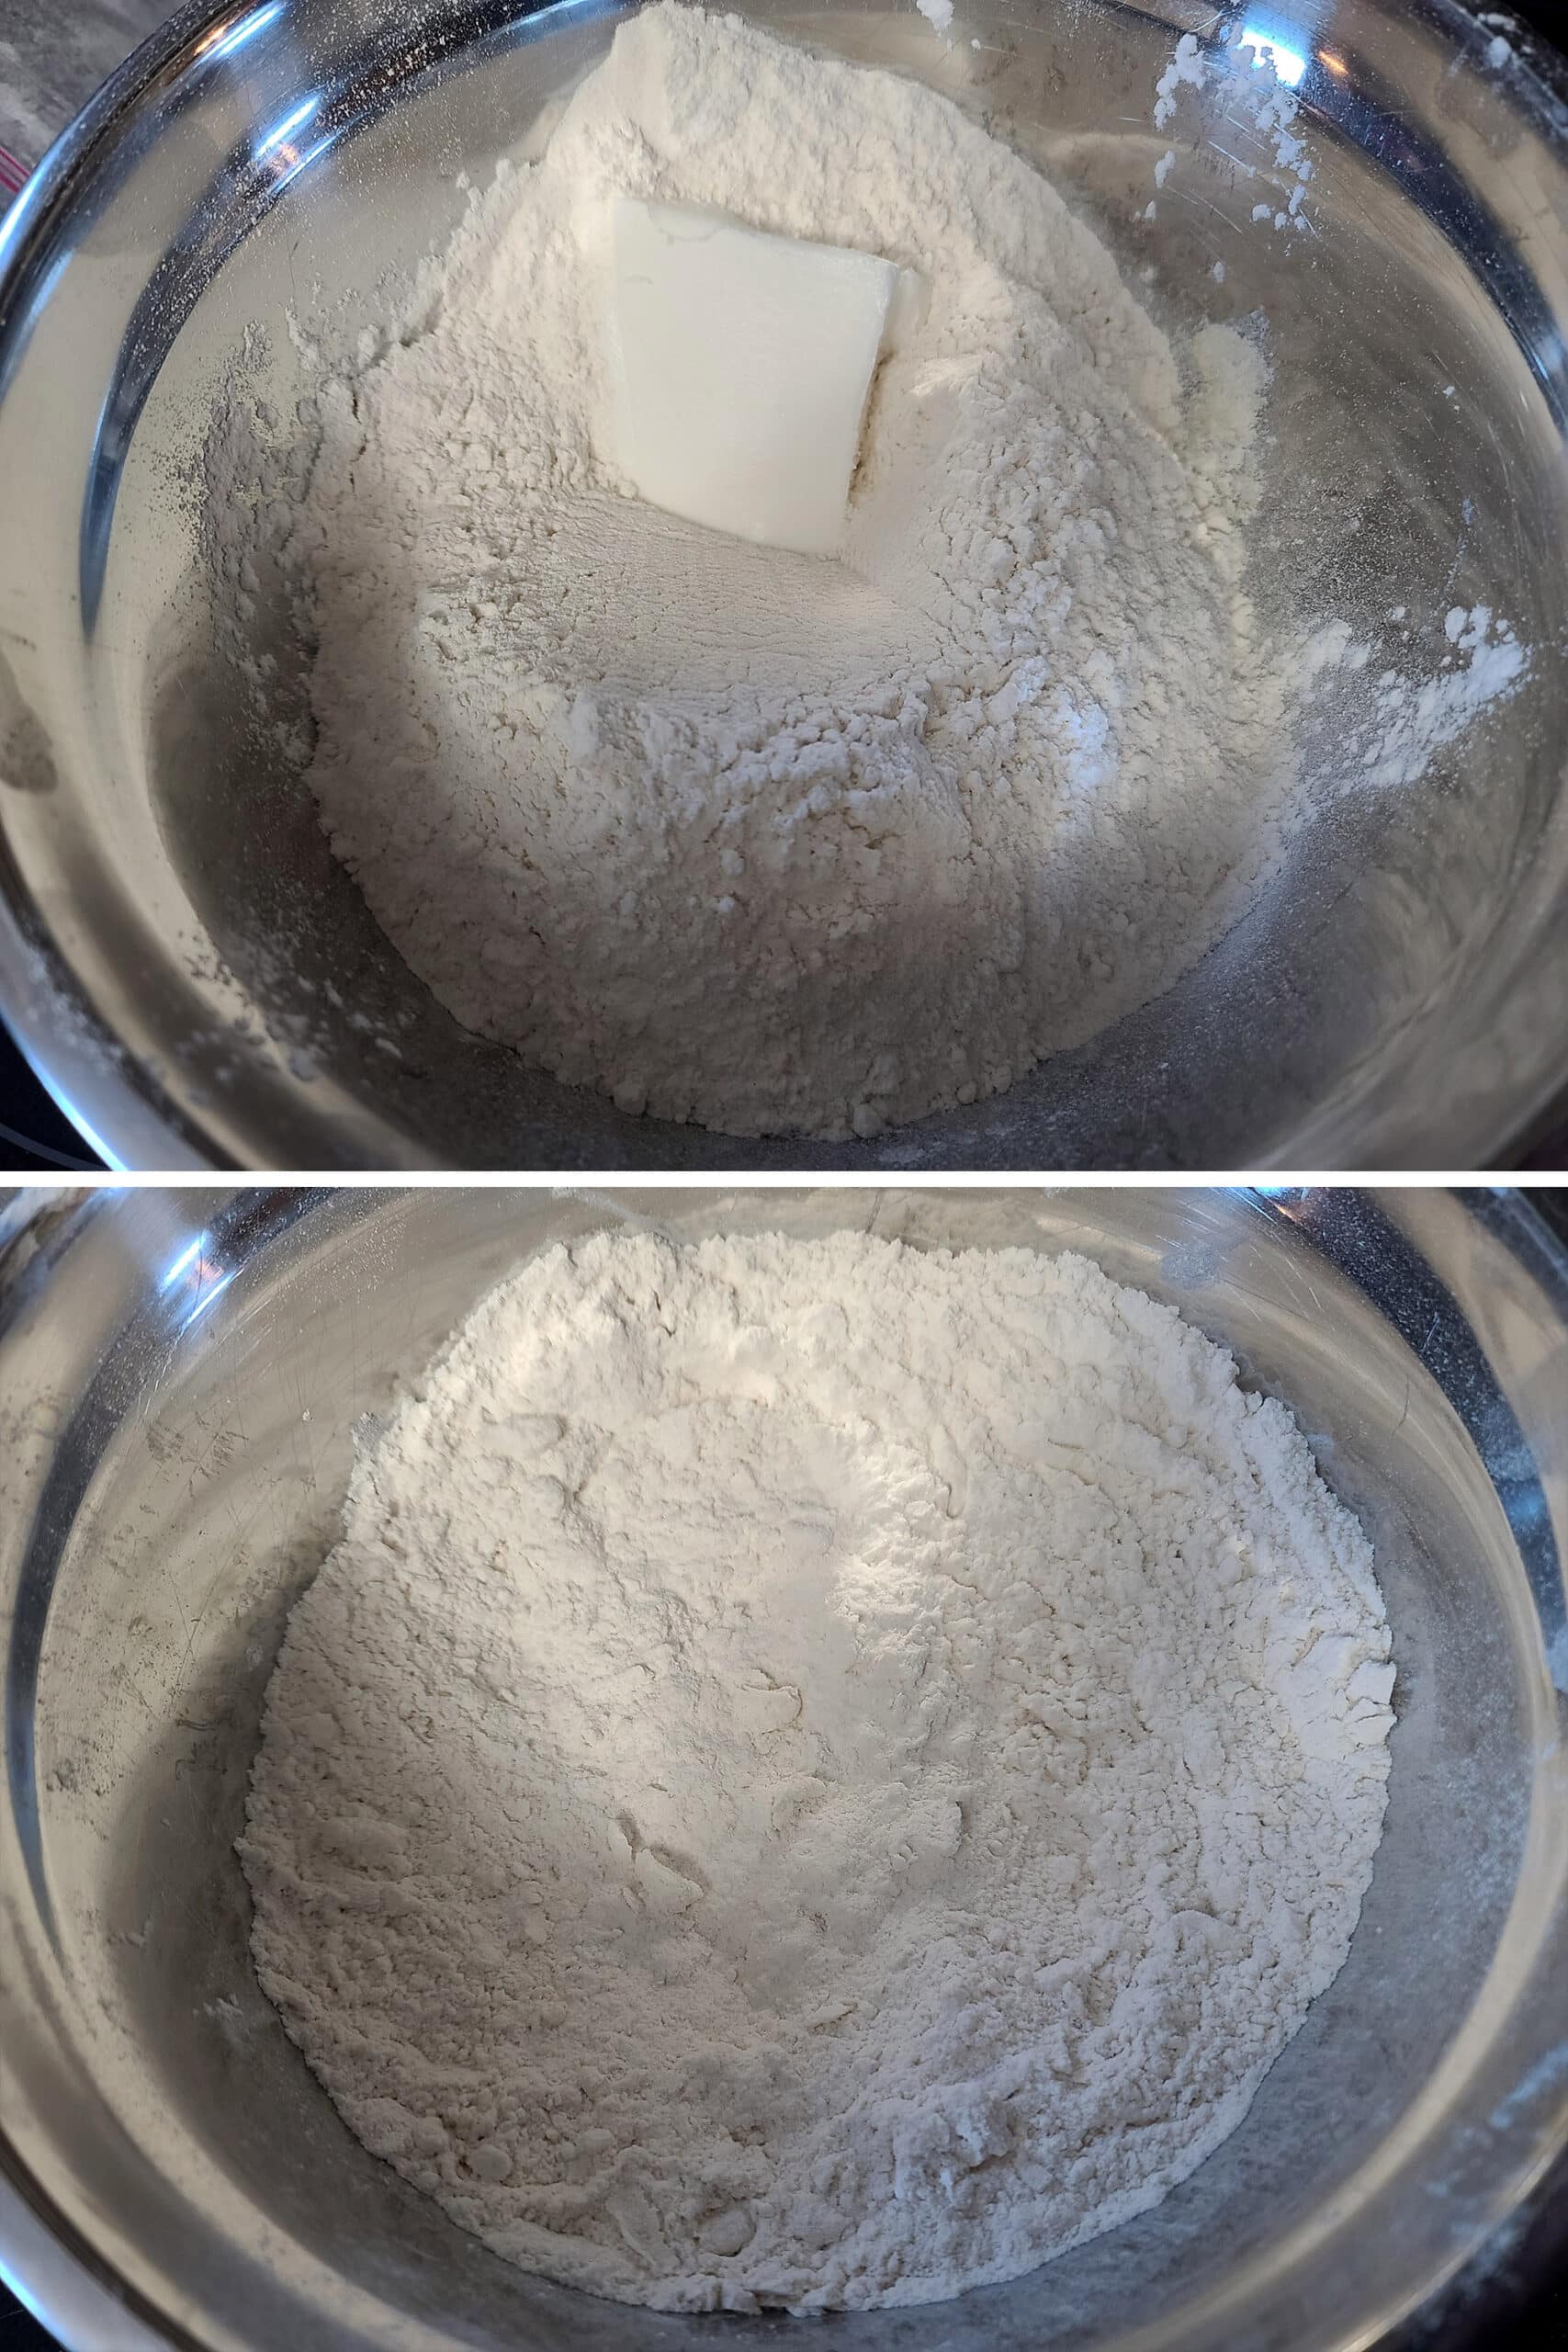 A 2 part image showing lard being cut into the bowl of dry ingredients.